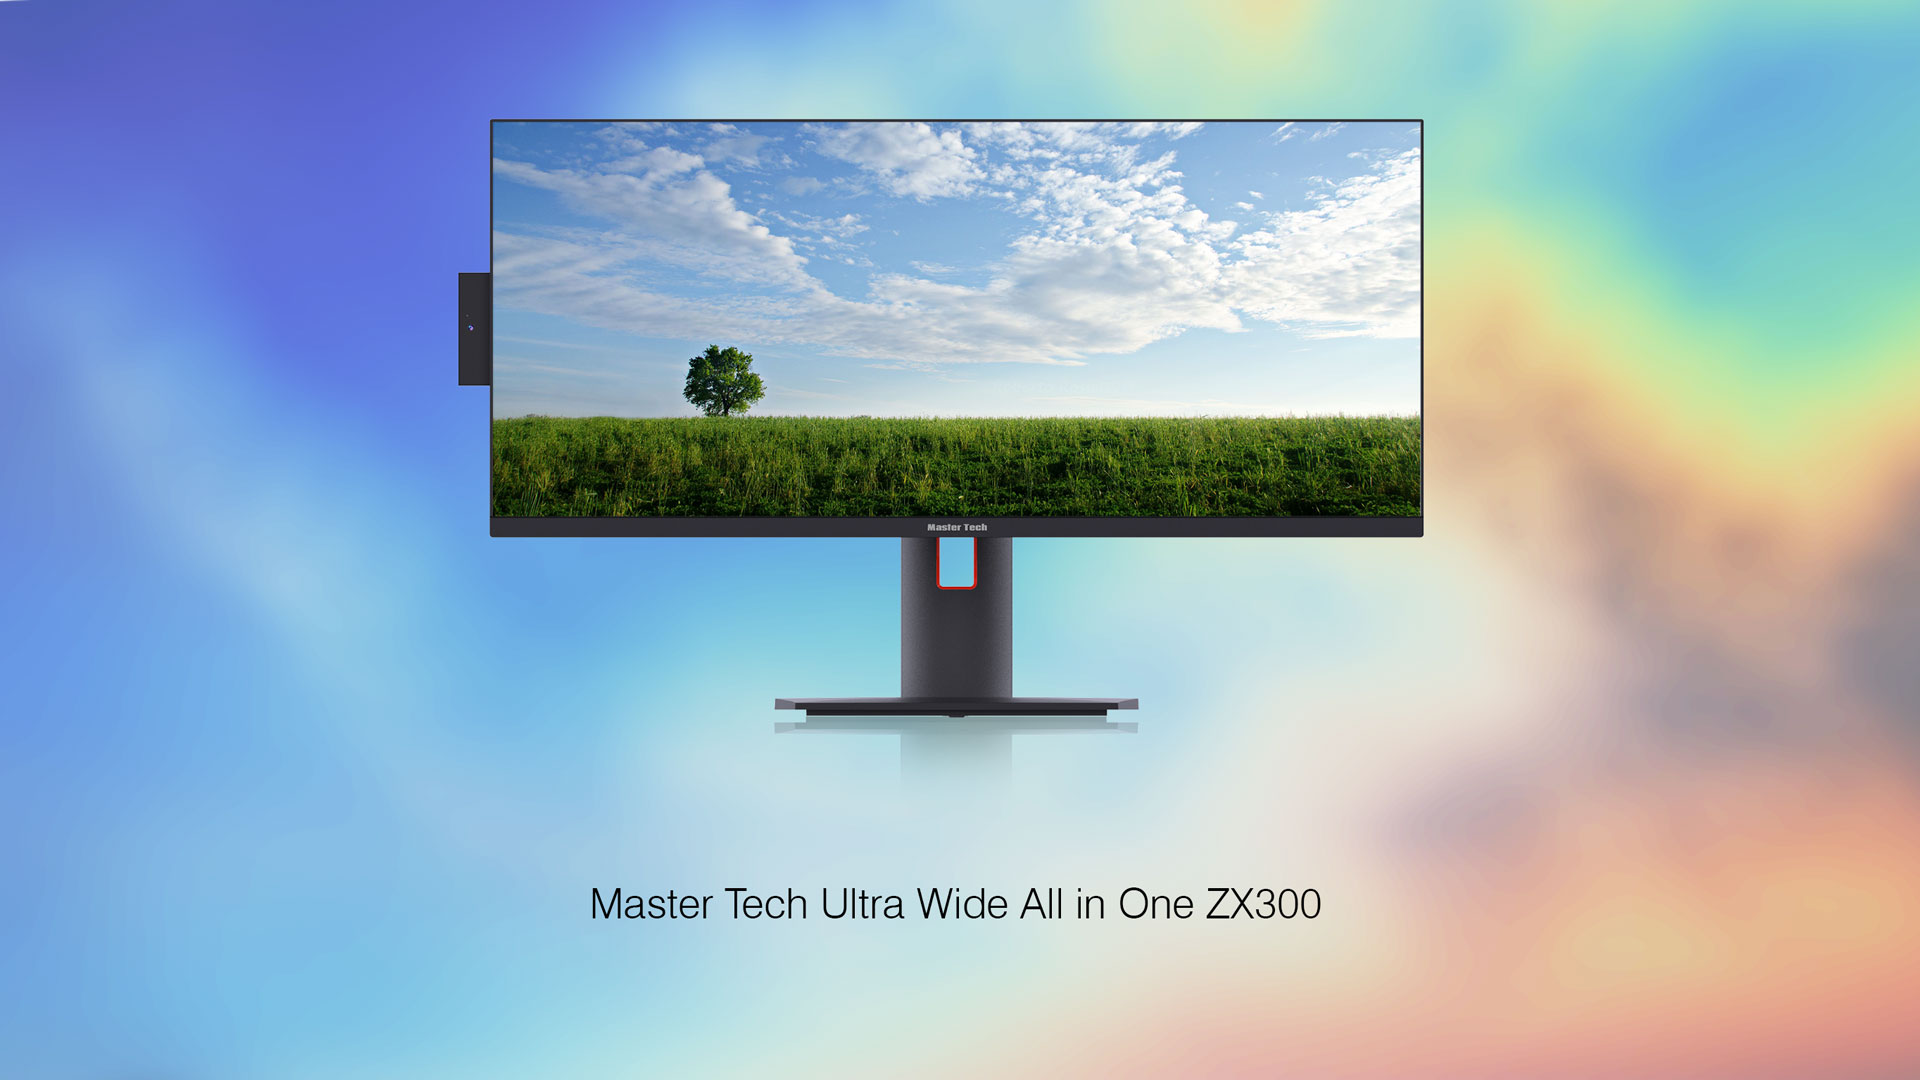 Master Tech All ine One ZX300|آل این وان مسترتک 